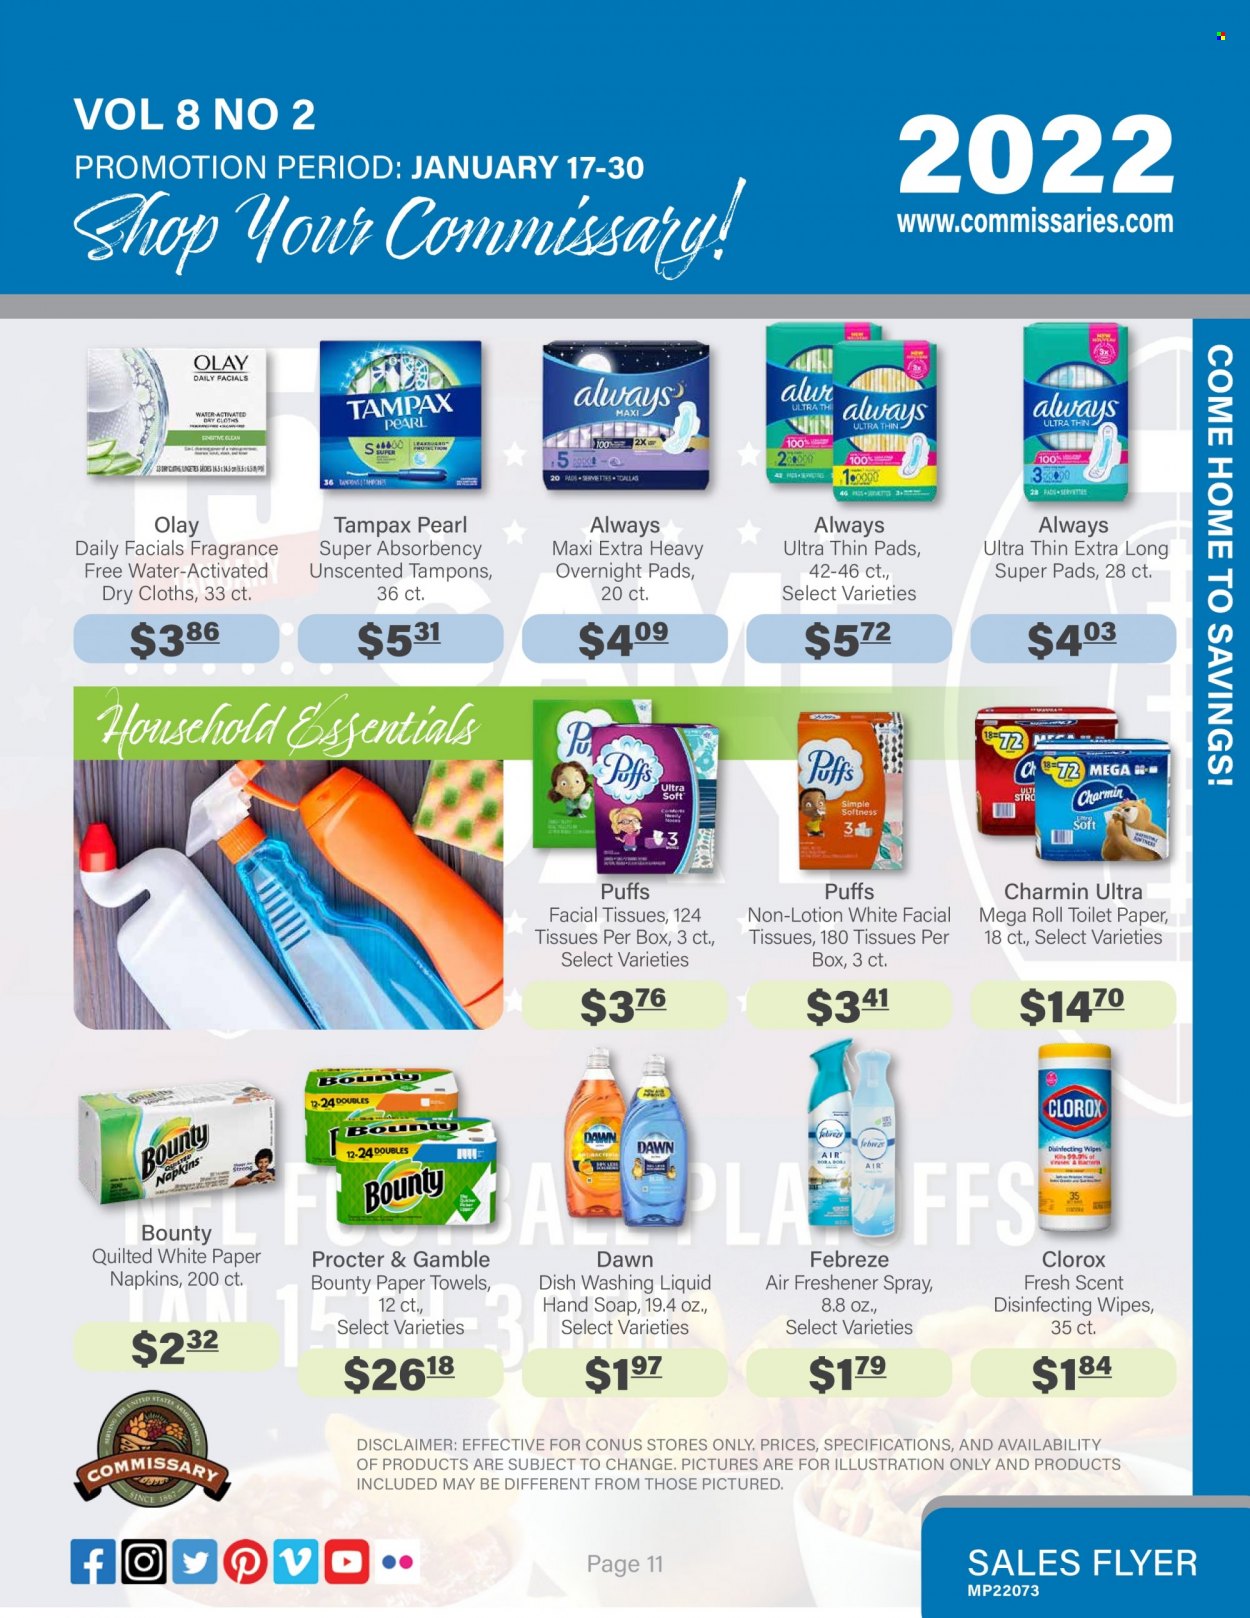 thumbnail - Commissary Flyer - 01/17/2022 - 01/30/2022 - Sales products - puffs, Bounty, wipes, napkins, toilet paper, tissues, kitchen towels, paper towels, Charmin, Febreze, Clorox, dishwashing liquid, hand soap, soap, Tampax, sanitary pads, tampons, facial tissues, Olay, body lotion. Page 11.